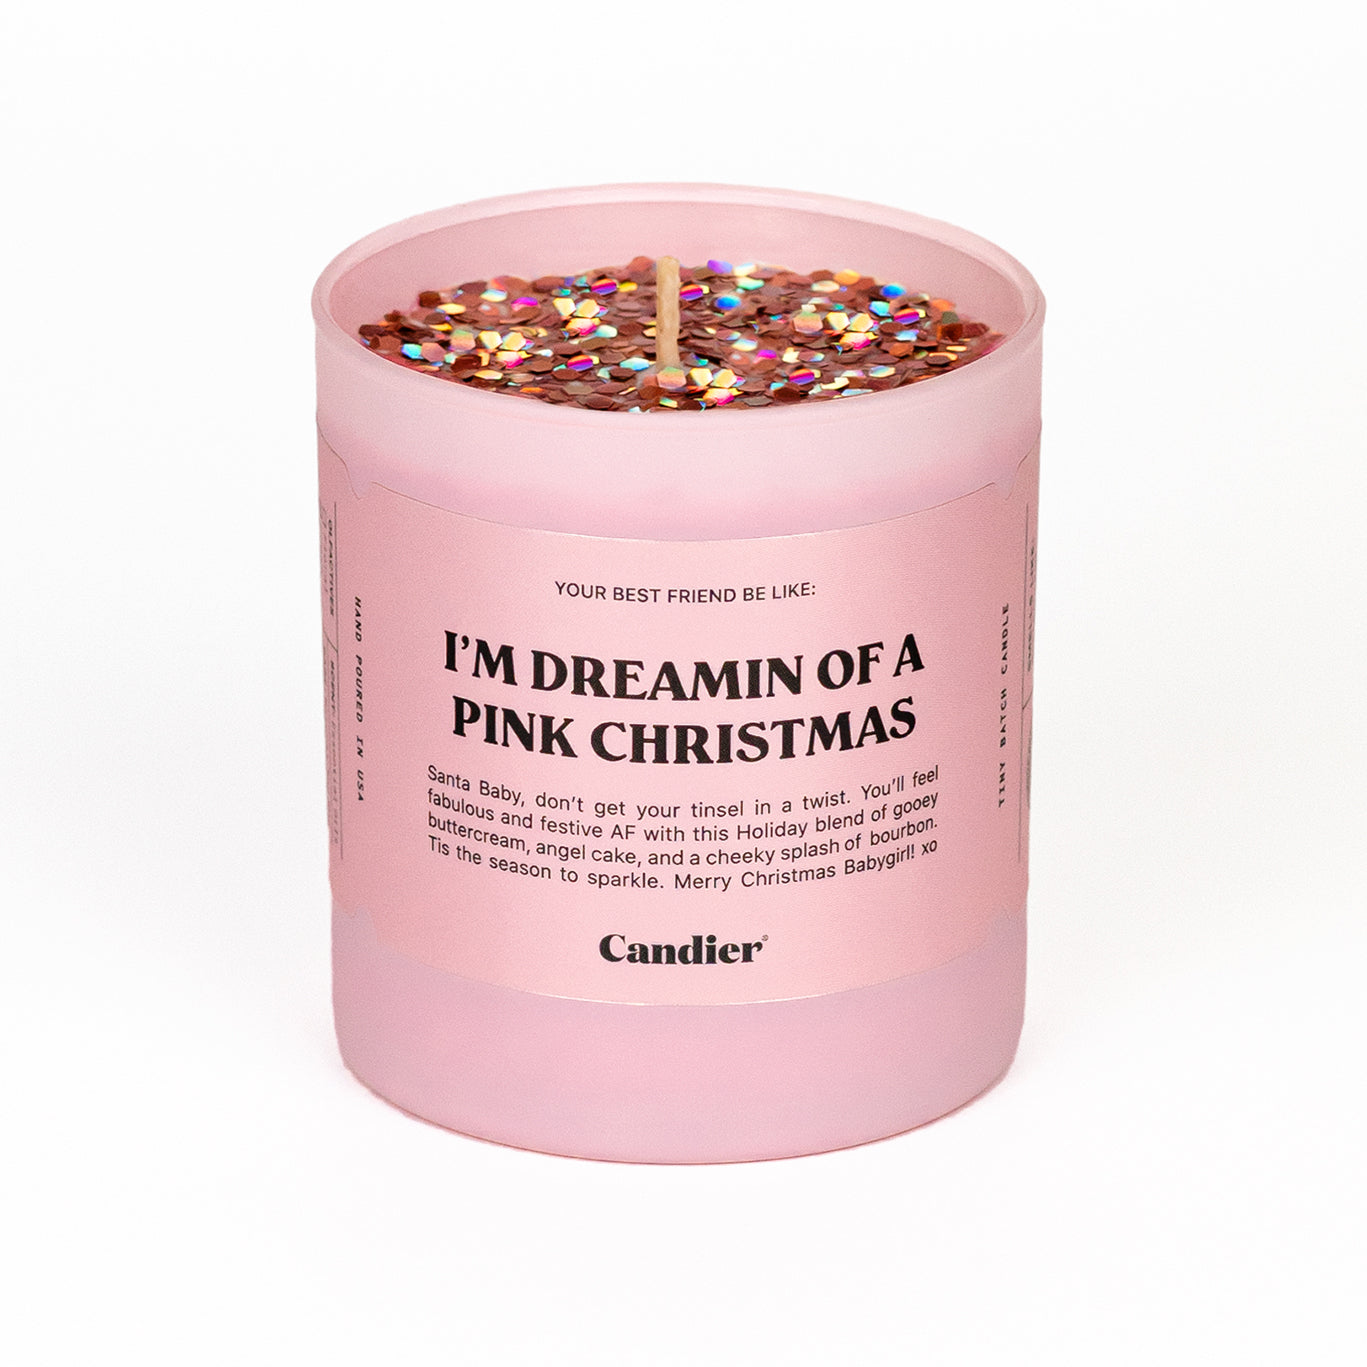 A Candier candle in a matte light pink glass vessel, topped with sparkling pink and holographic glitter, and a label that reads “I”’m Dreaming Of A Pink Christmas”